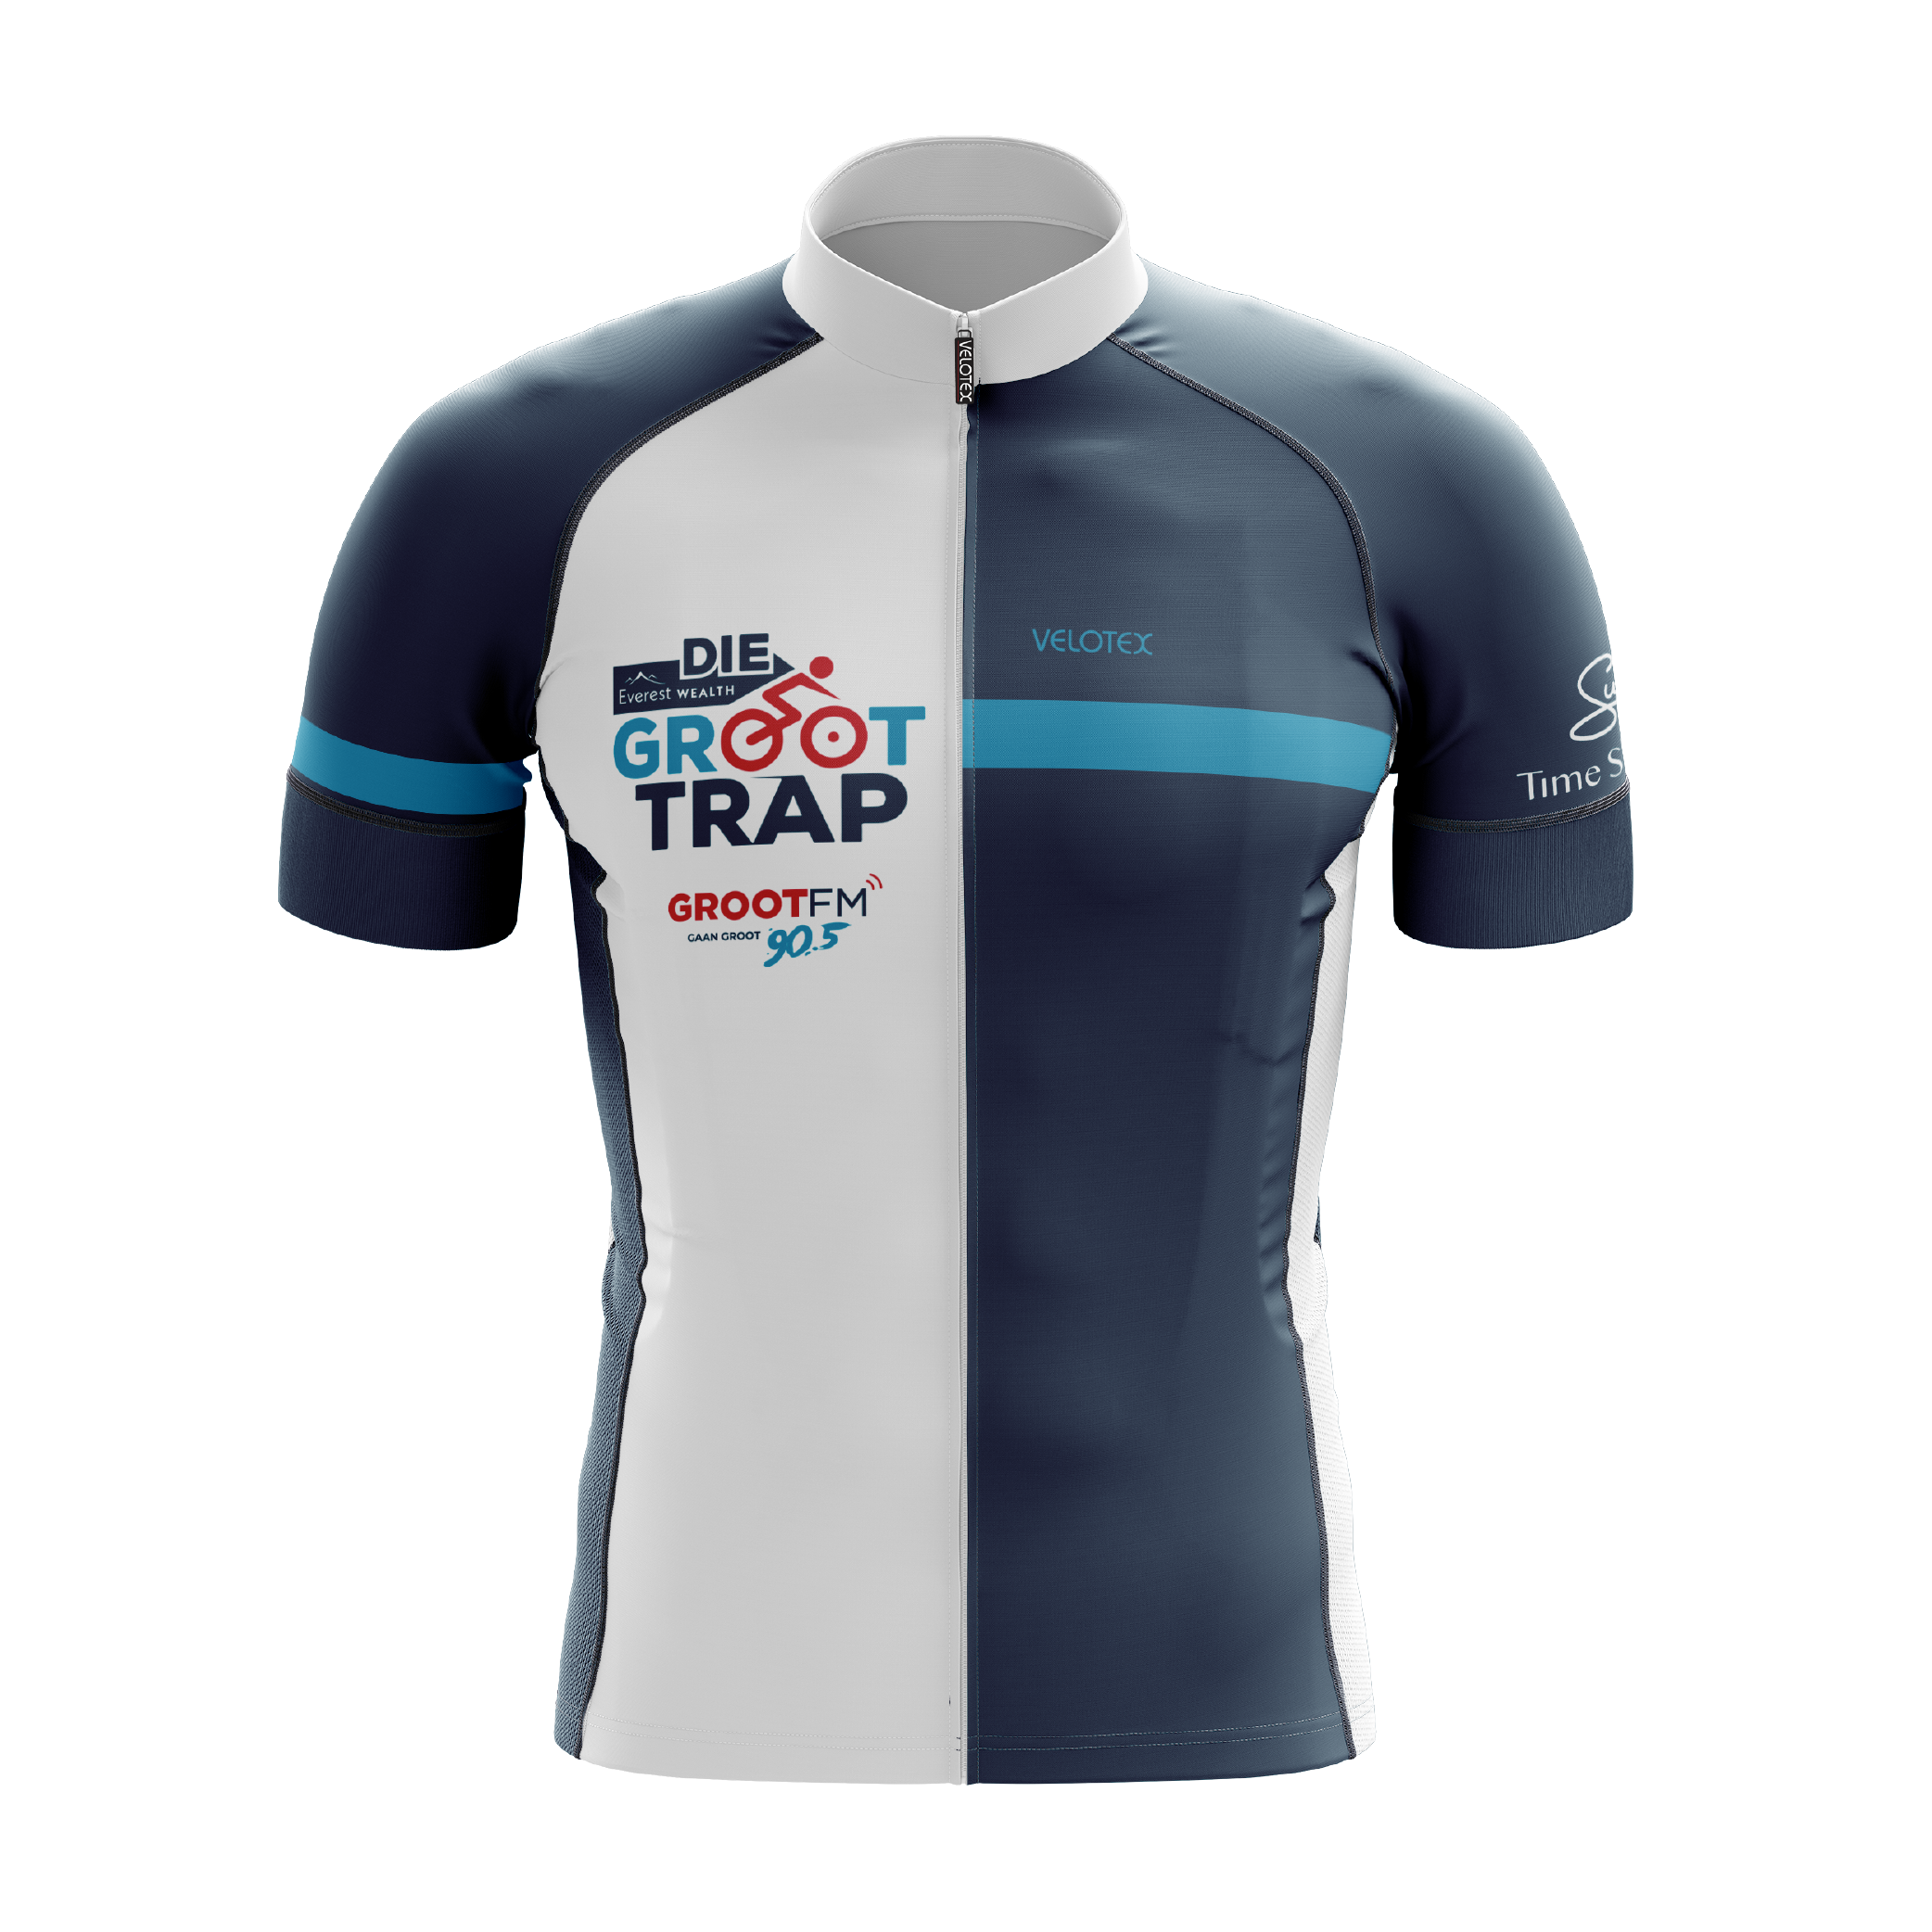 Die Everest Wealth Groot Trap Mens Souvenir Cycle Jersey Vento